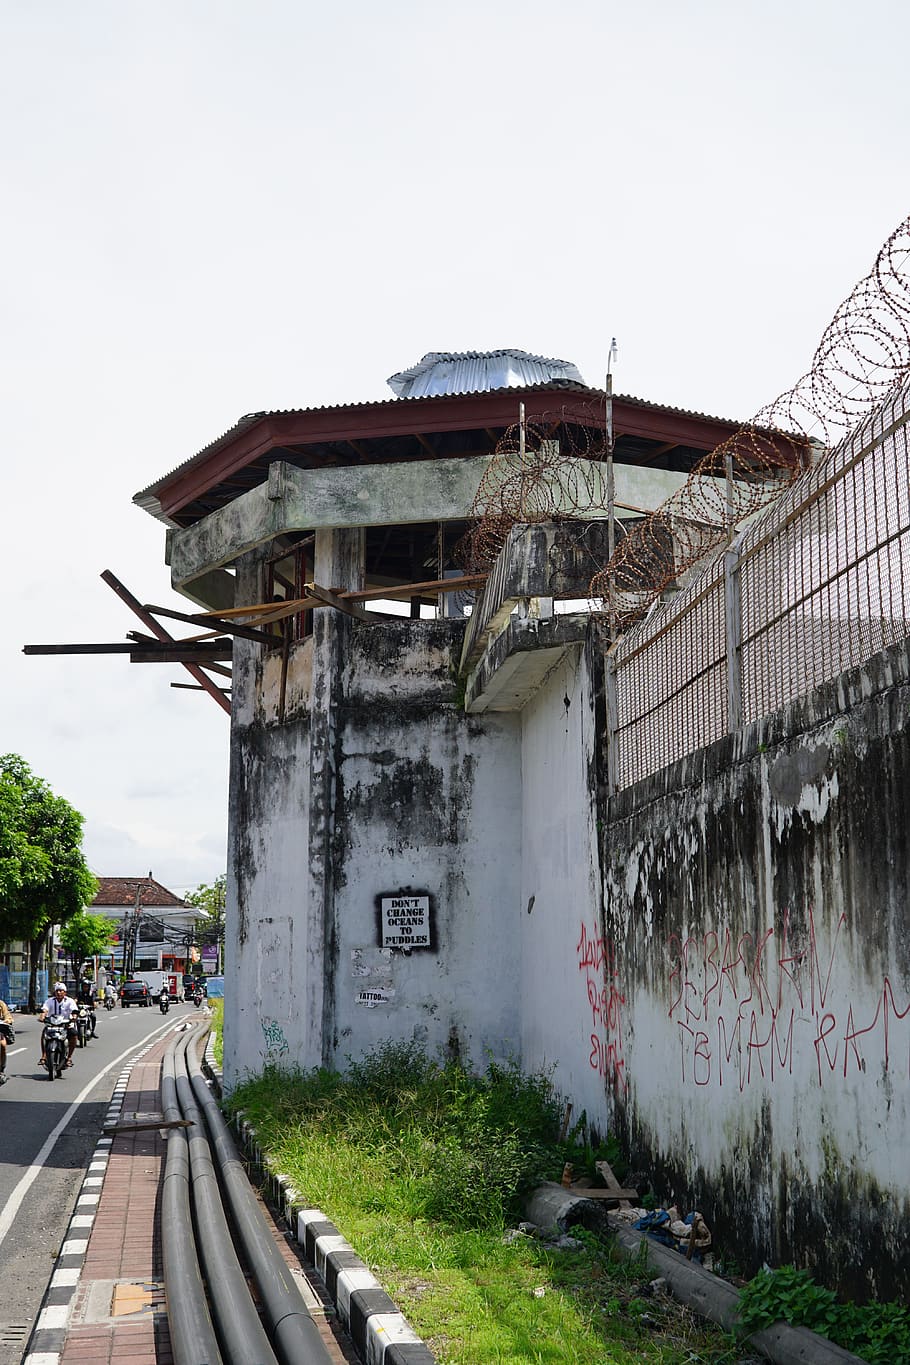 indonesia, bali, denpasar, prison, kerobokan, tower, wire, barbed wire, wall, white